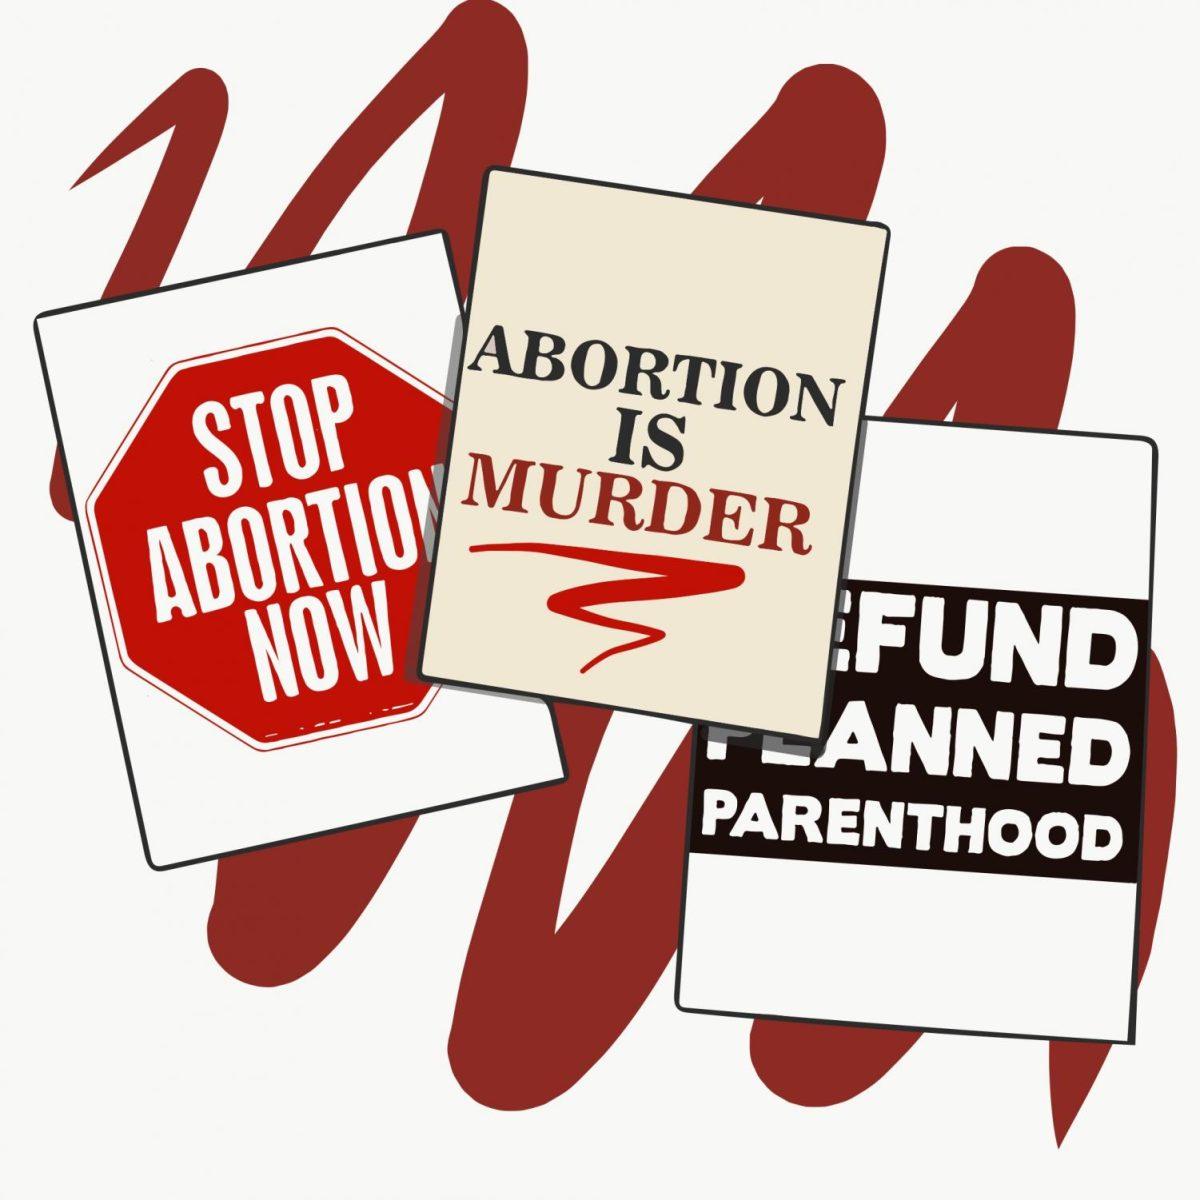 An illustration of three protest signs that read “STOP ABORTION NOW”, “ABORTION IS MURDER”, and “DEFUND PLANNED PARENTHOOD”.